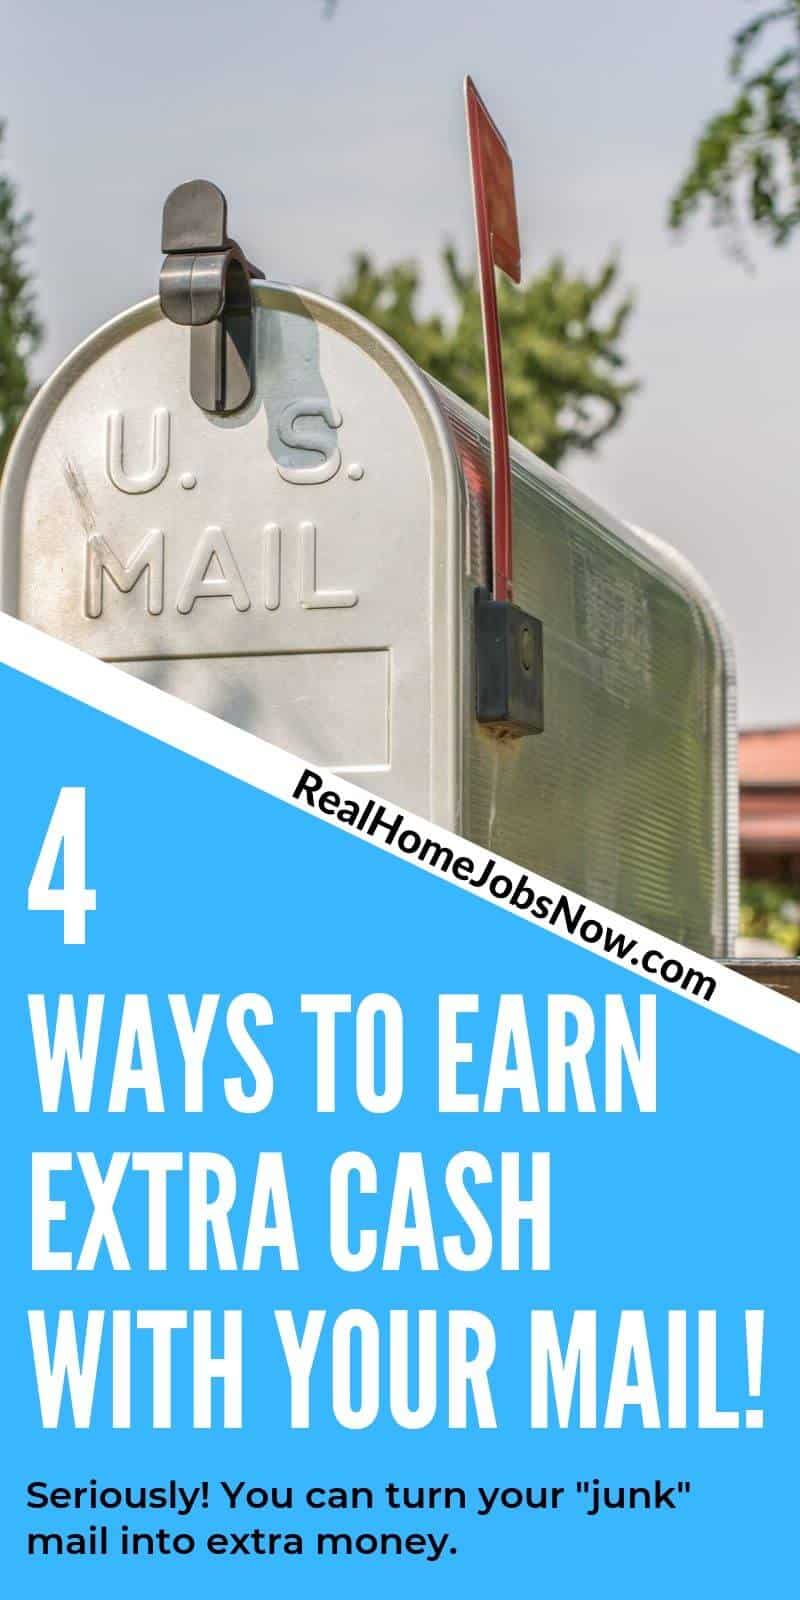 Looking for an easy, interesting way to make extra money from home? You can get paid to get your mail! Your junk mail can help you earn extra cash, and it's completely legitimate, non phone, and flexible! #remotework #moneyfromhome #howtomakemoney #money #earnmoney #extramoney #extraincome #extracash